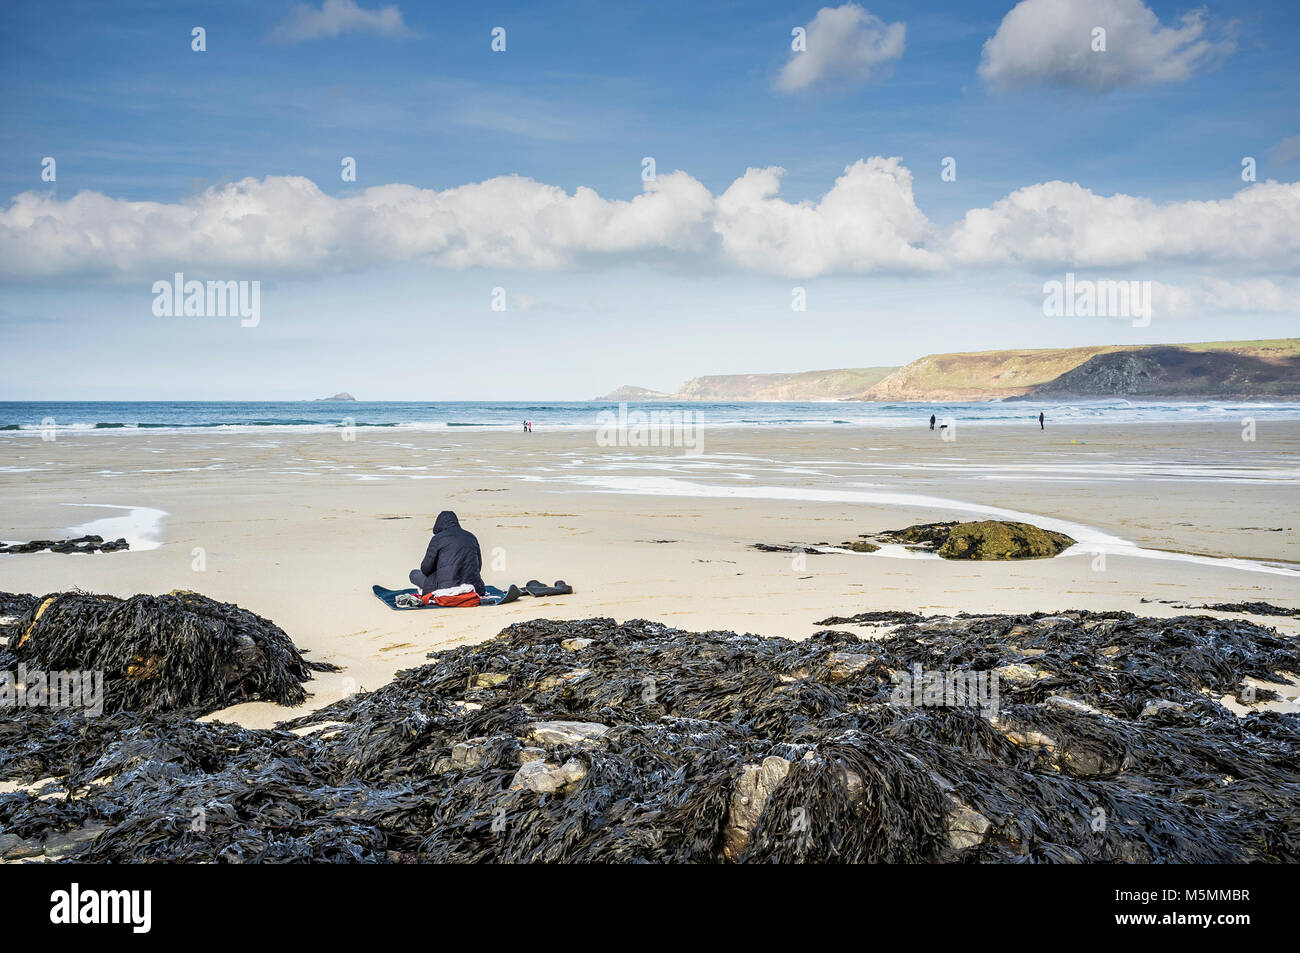 A hooded figure sitting on the beach at Sennen Cove in Cornwall. Stock Photo